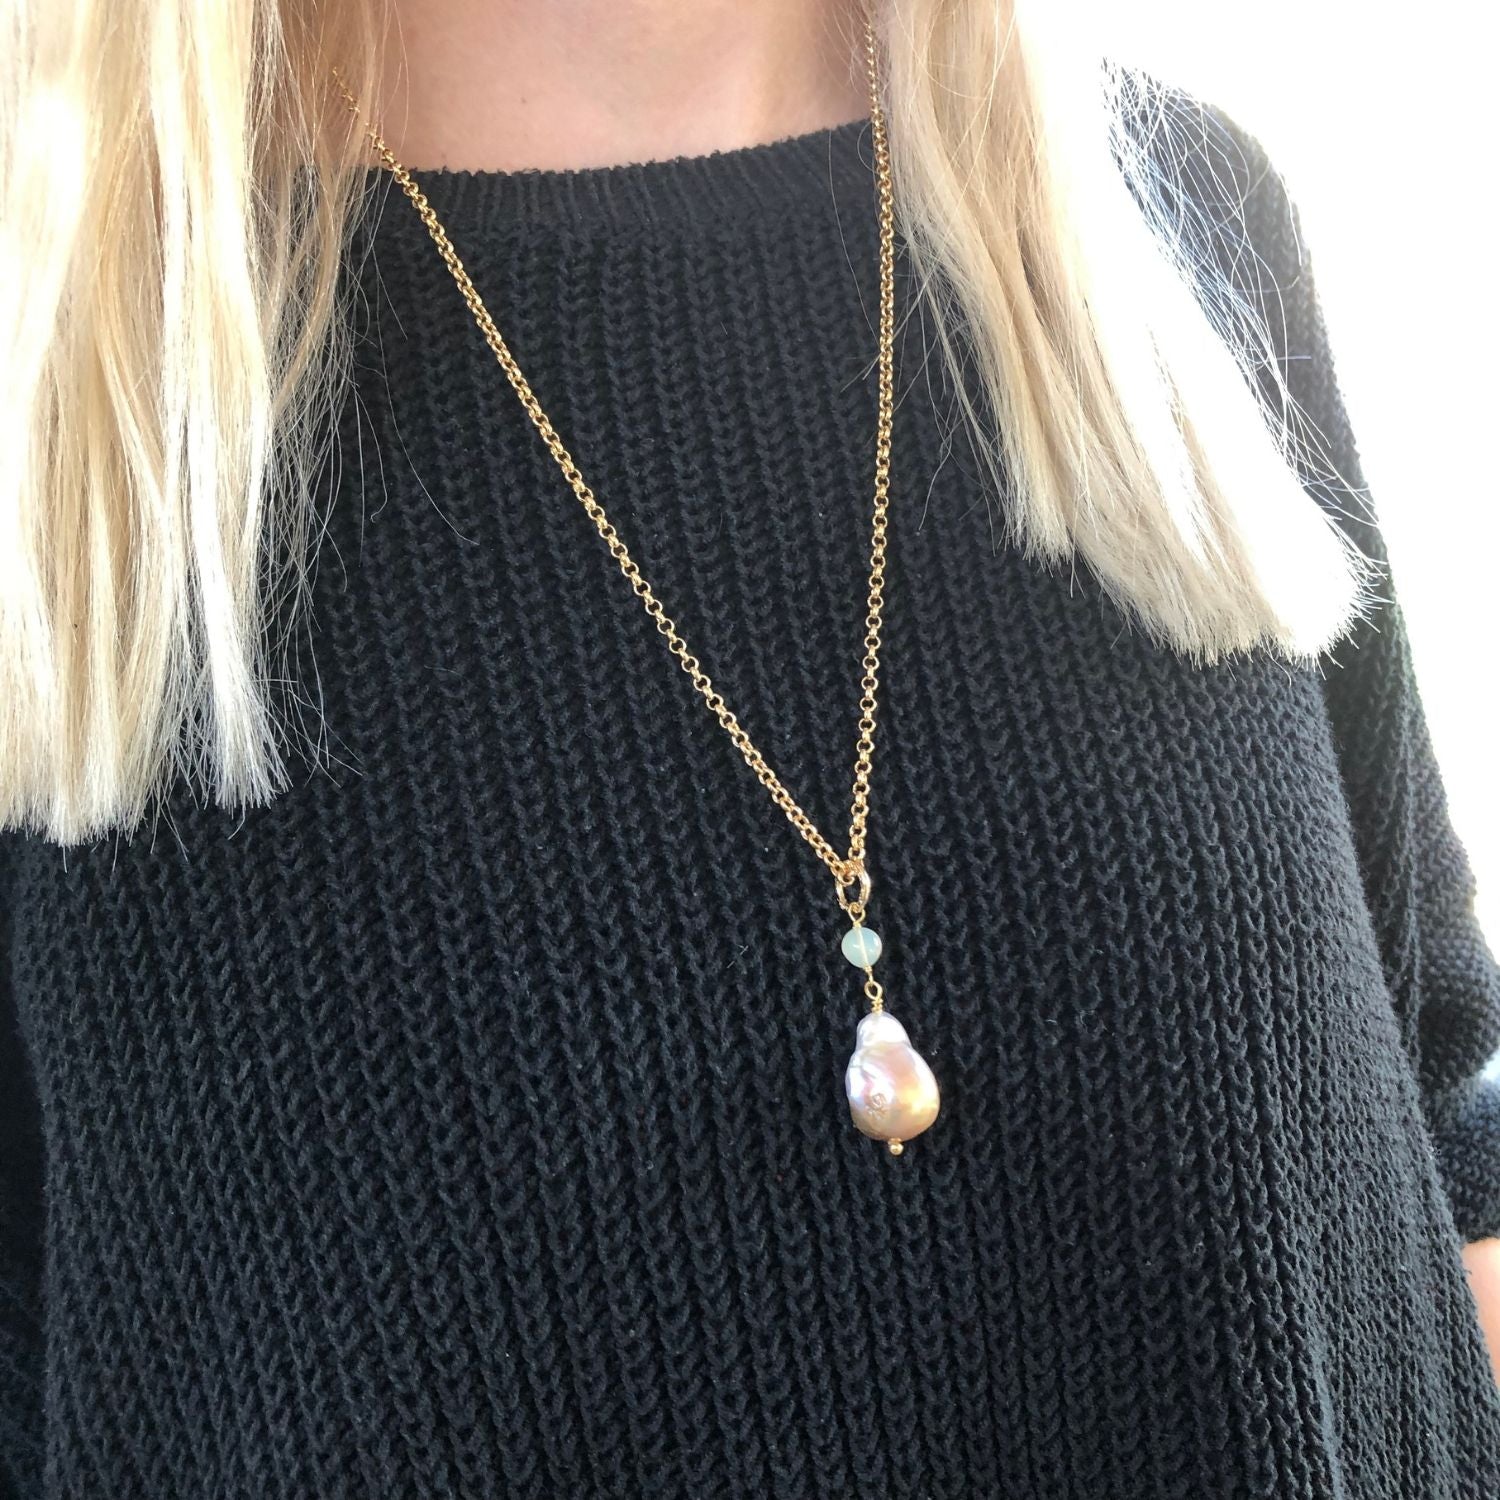 Unique Large Baroque Freeform  Pearl with Opal on Belcher chain